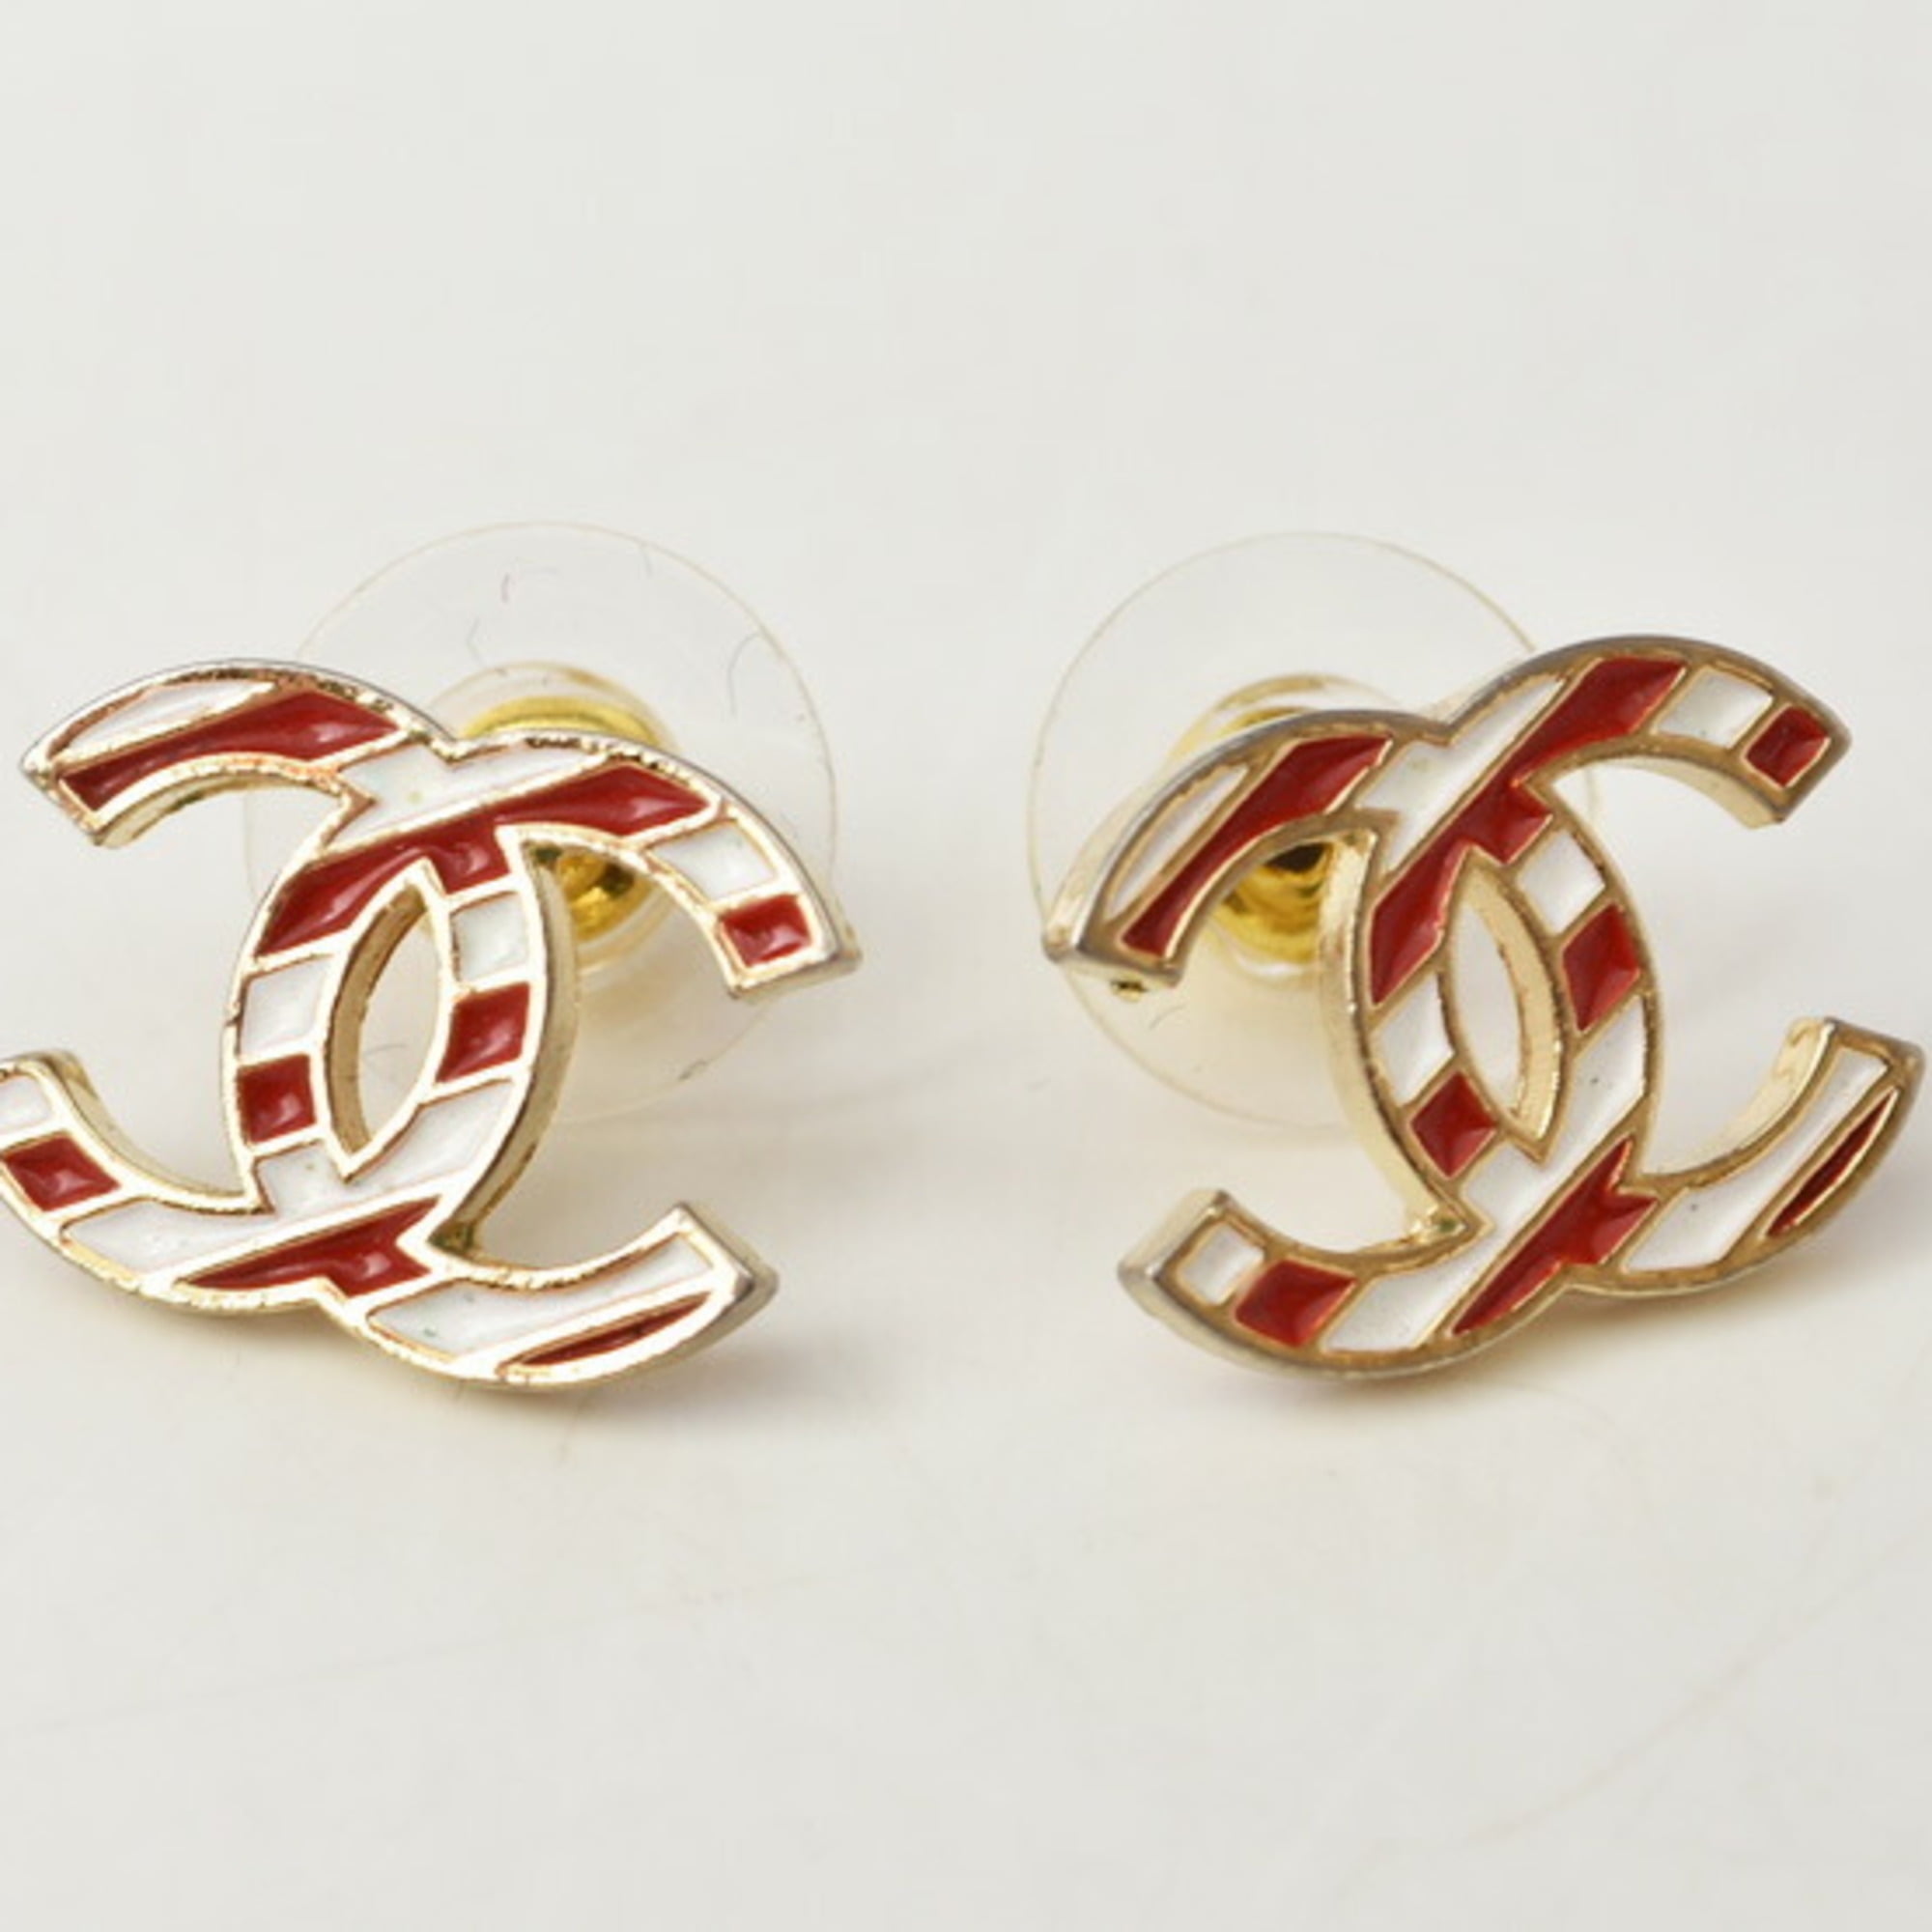 Authenticated Used Chanel earrings CHANEL CC mark stripe pattern red/white - Walmart.com